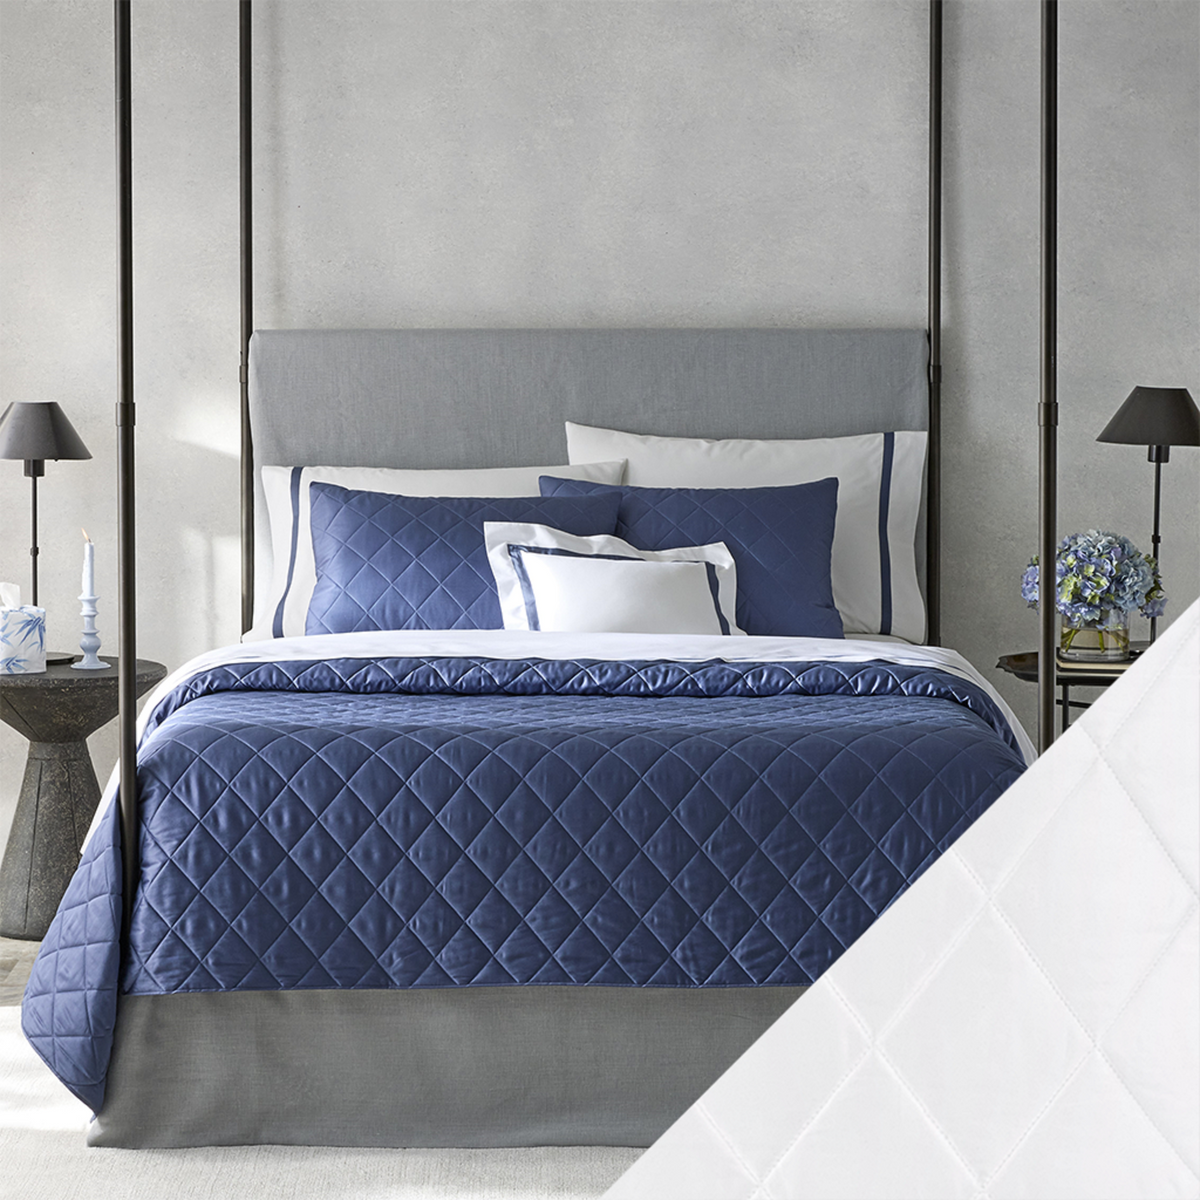 Matouk Nocturne Bedding Main Image with Swatch in White